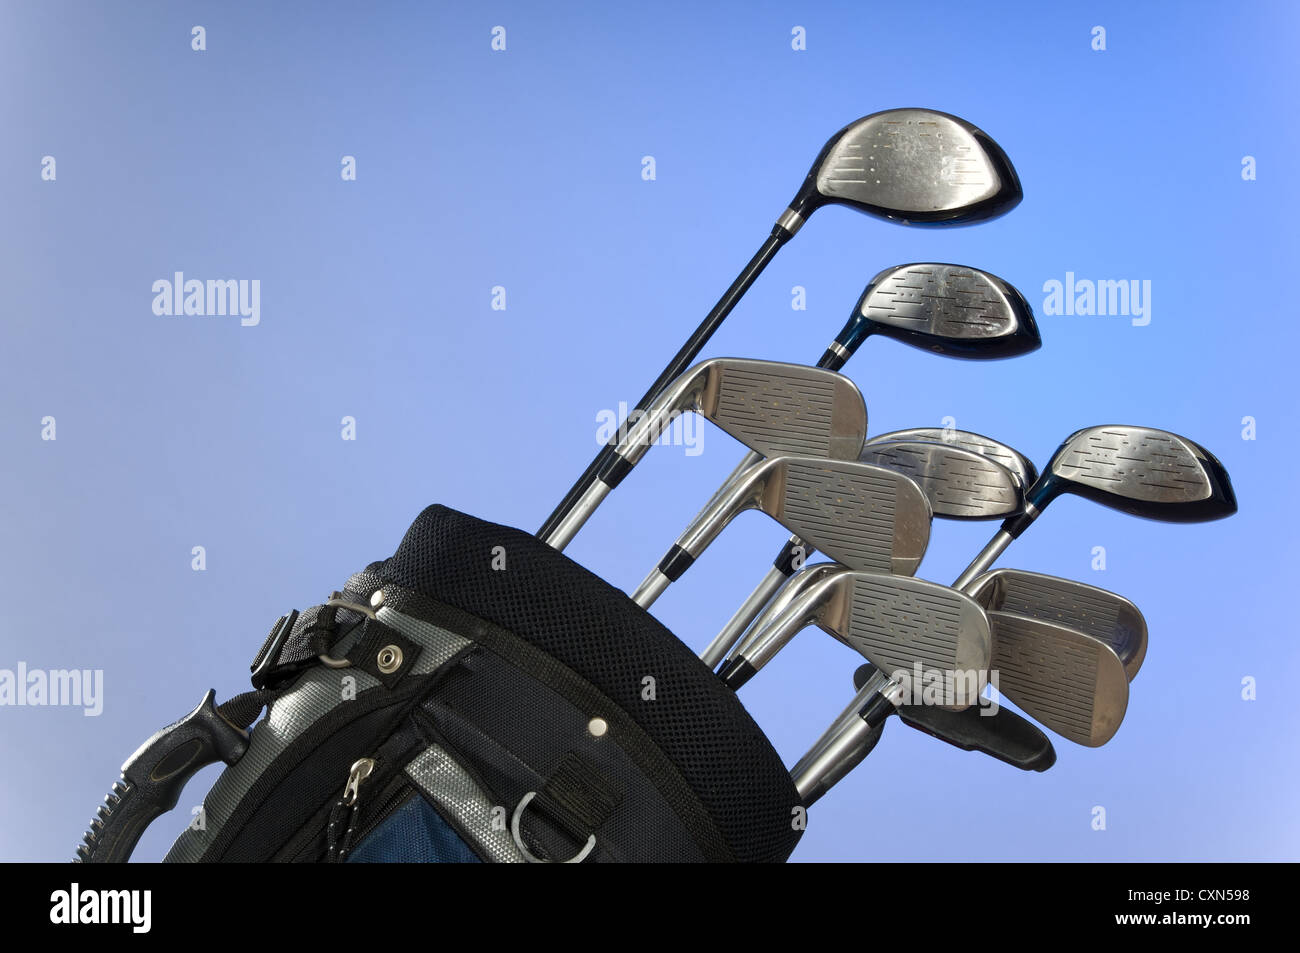 Golf club on blue background - great for background Stock Photo